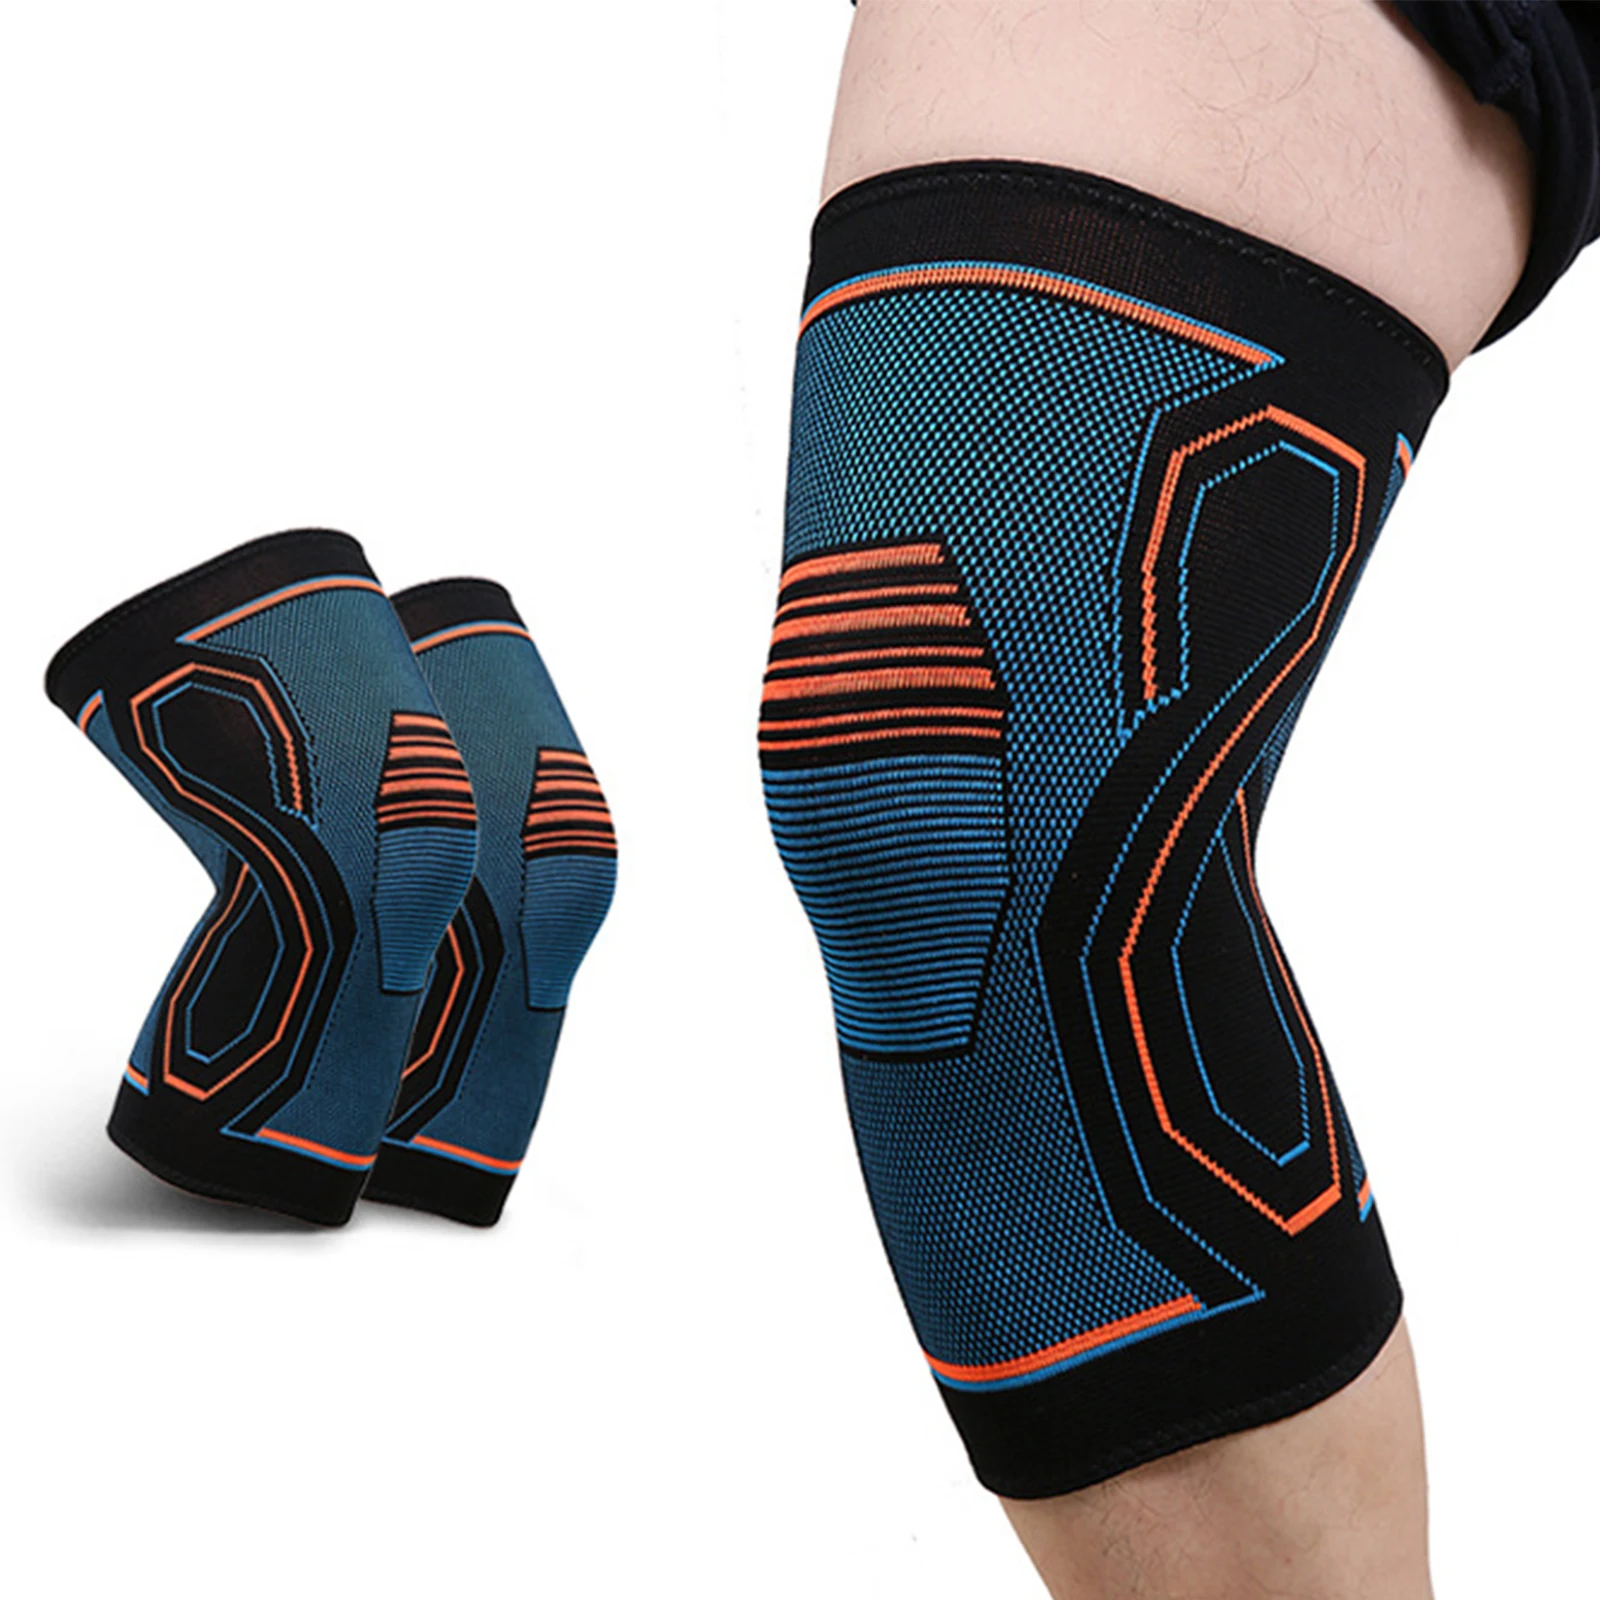 Compression Knee Brace Workout Knee Support for Joint Pain Relief Running Biking Basketball Knitted Knee Sleeve for Adult medical knee brace protect support knee orthosis fixation adjustable hinge splint for knee joint fracture